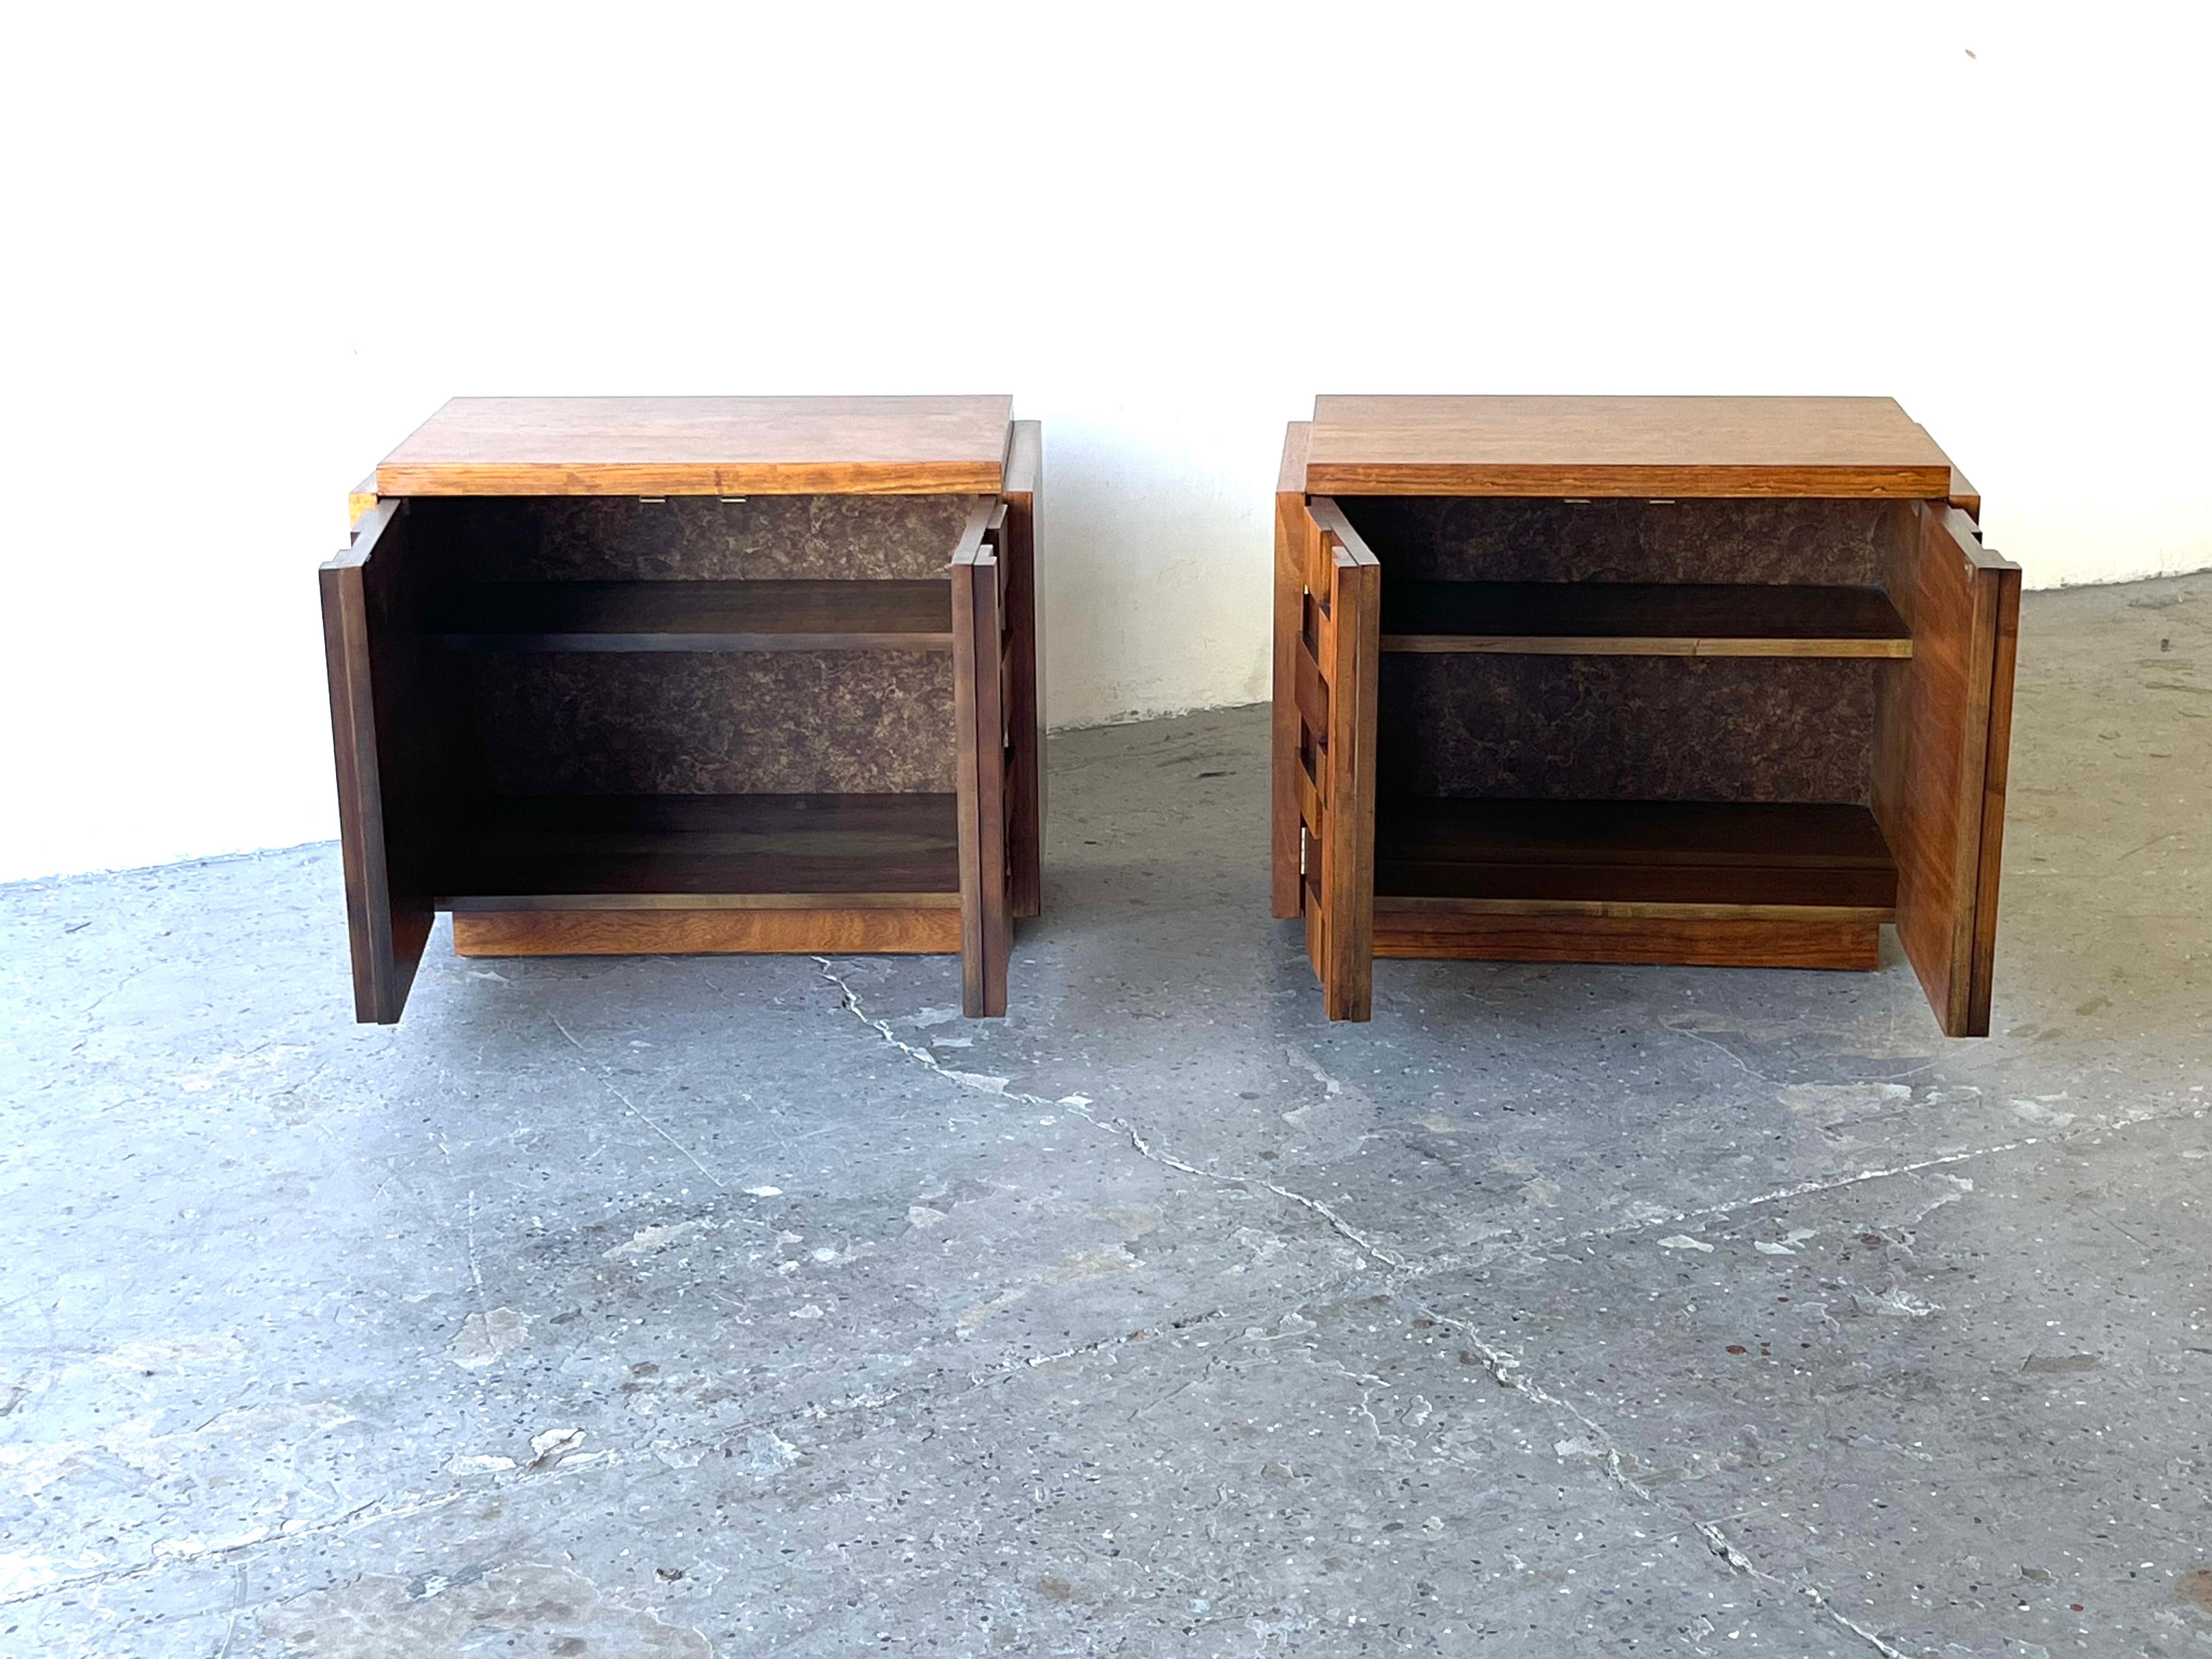 Pair of Lane Brutalist Staccato nightstands Mid-Century Modern end table



Beautiful Mosaic / Brutilist Pair of Nightstands in perfect professionally refinished and restored. in the Style Designers Like Adrian Pe and Paul Evans.


Measures